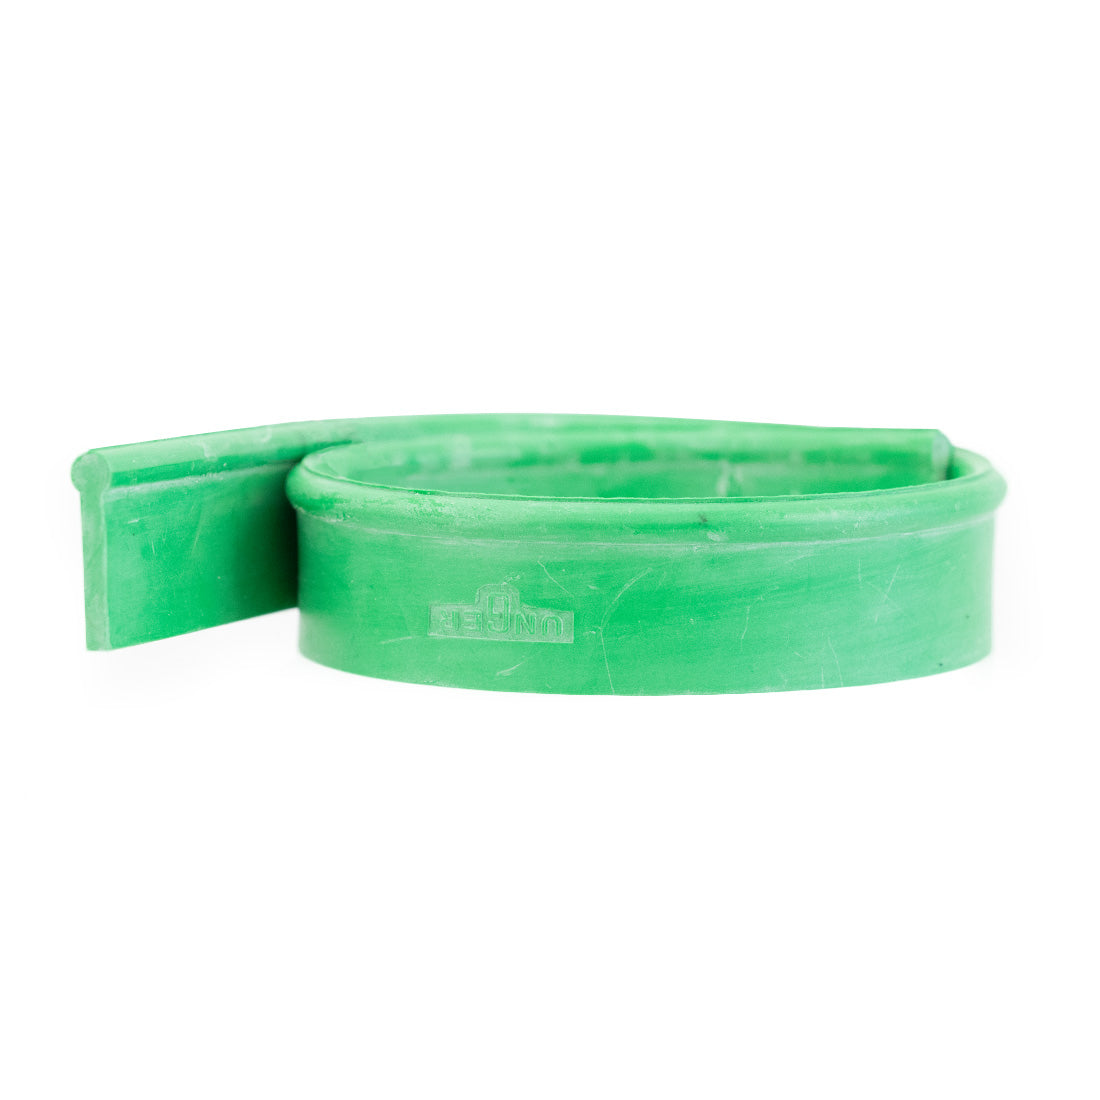 Unger Green Power Squeegee Rubber Roll View